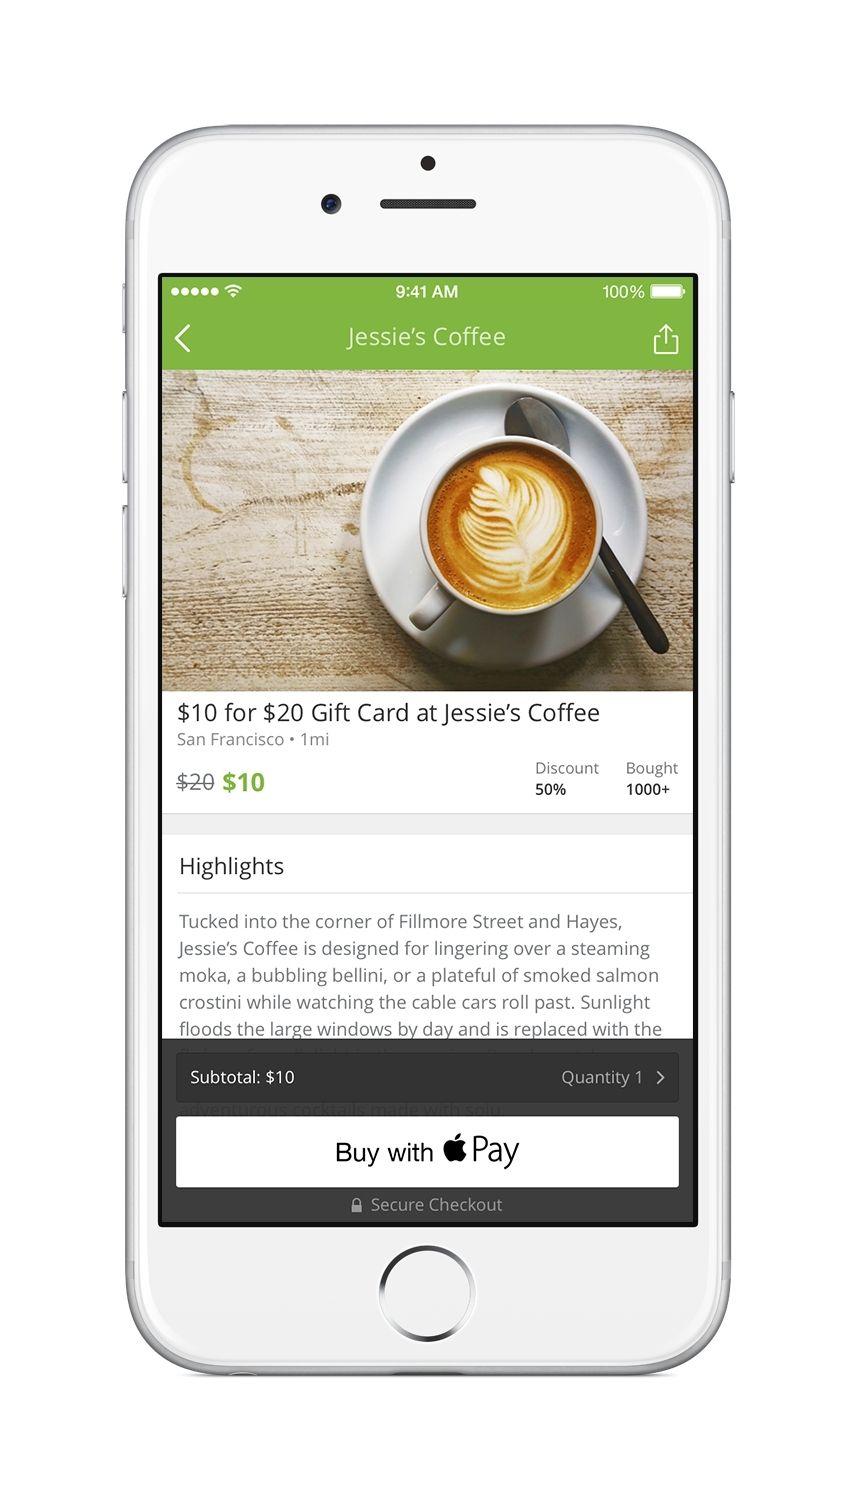 Groupon App Logo - Groupon Updates Popular iPhone App to Include Apple Pay | Business Wire